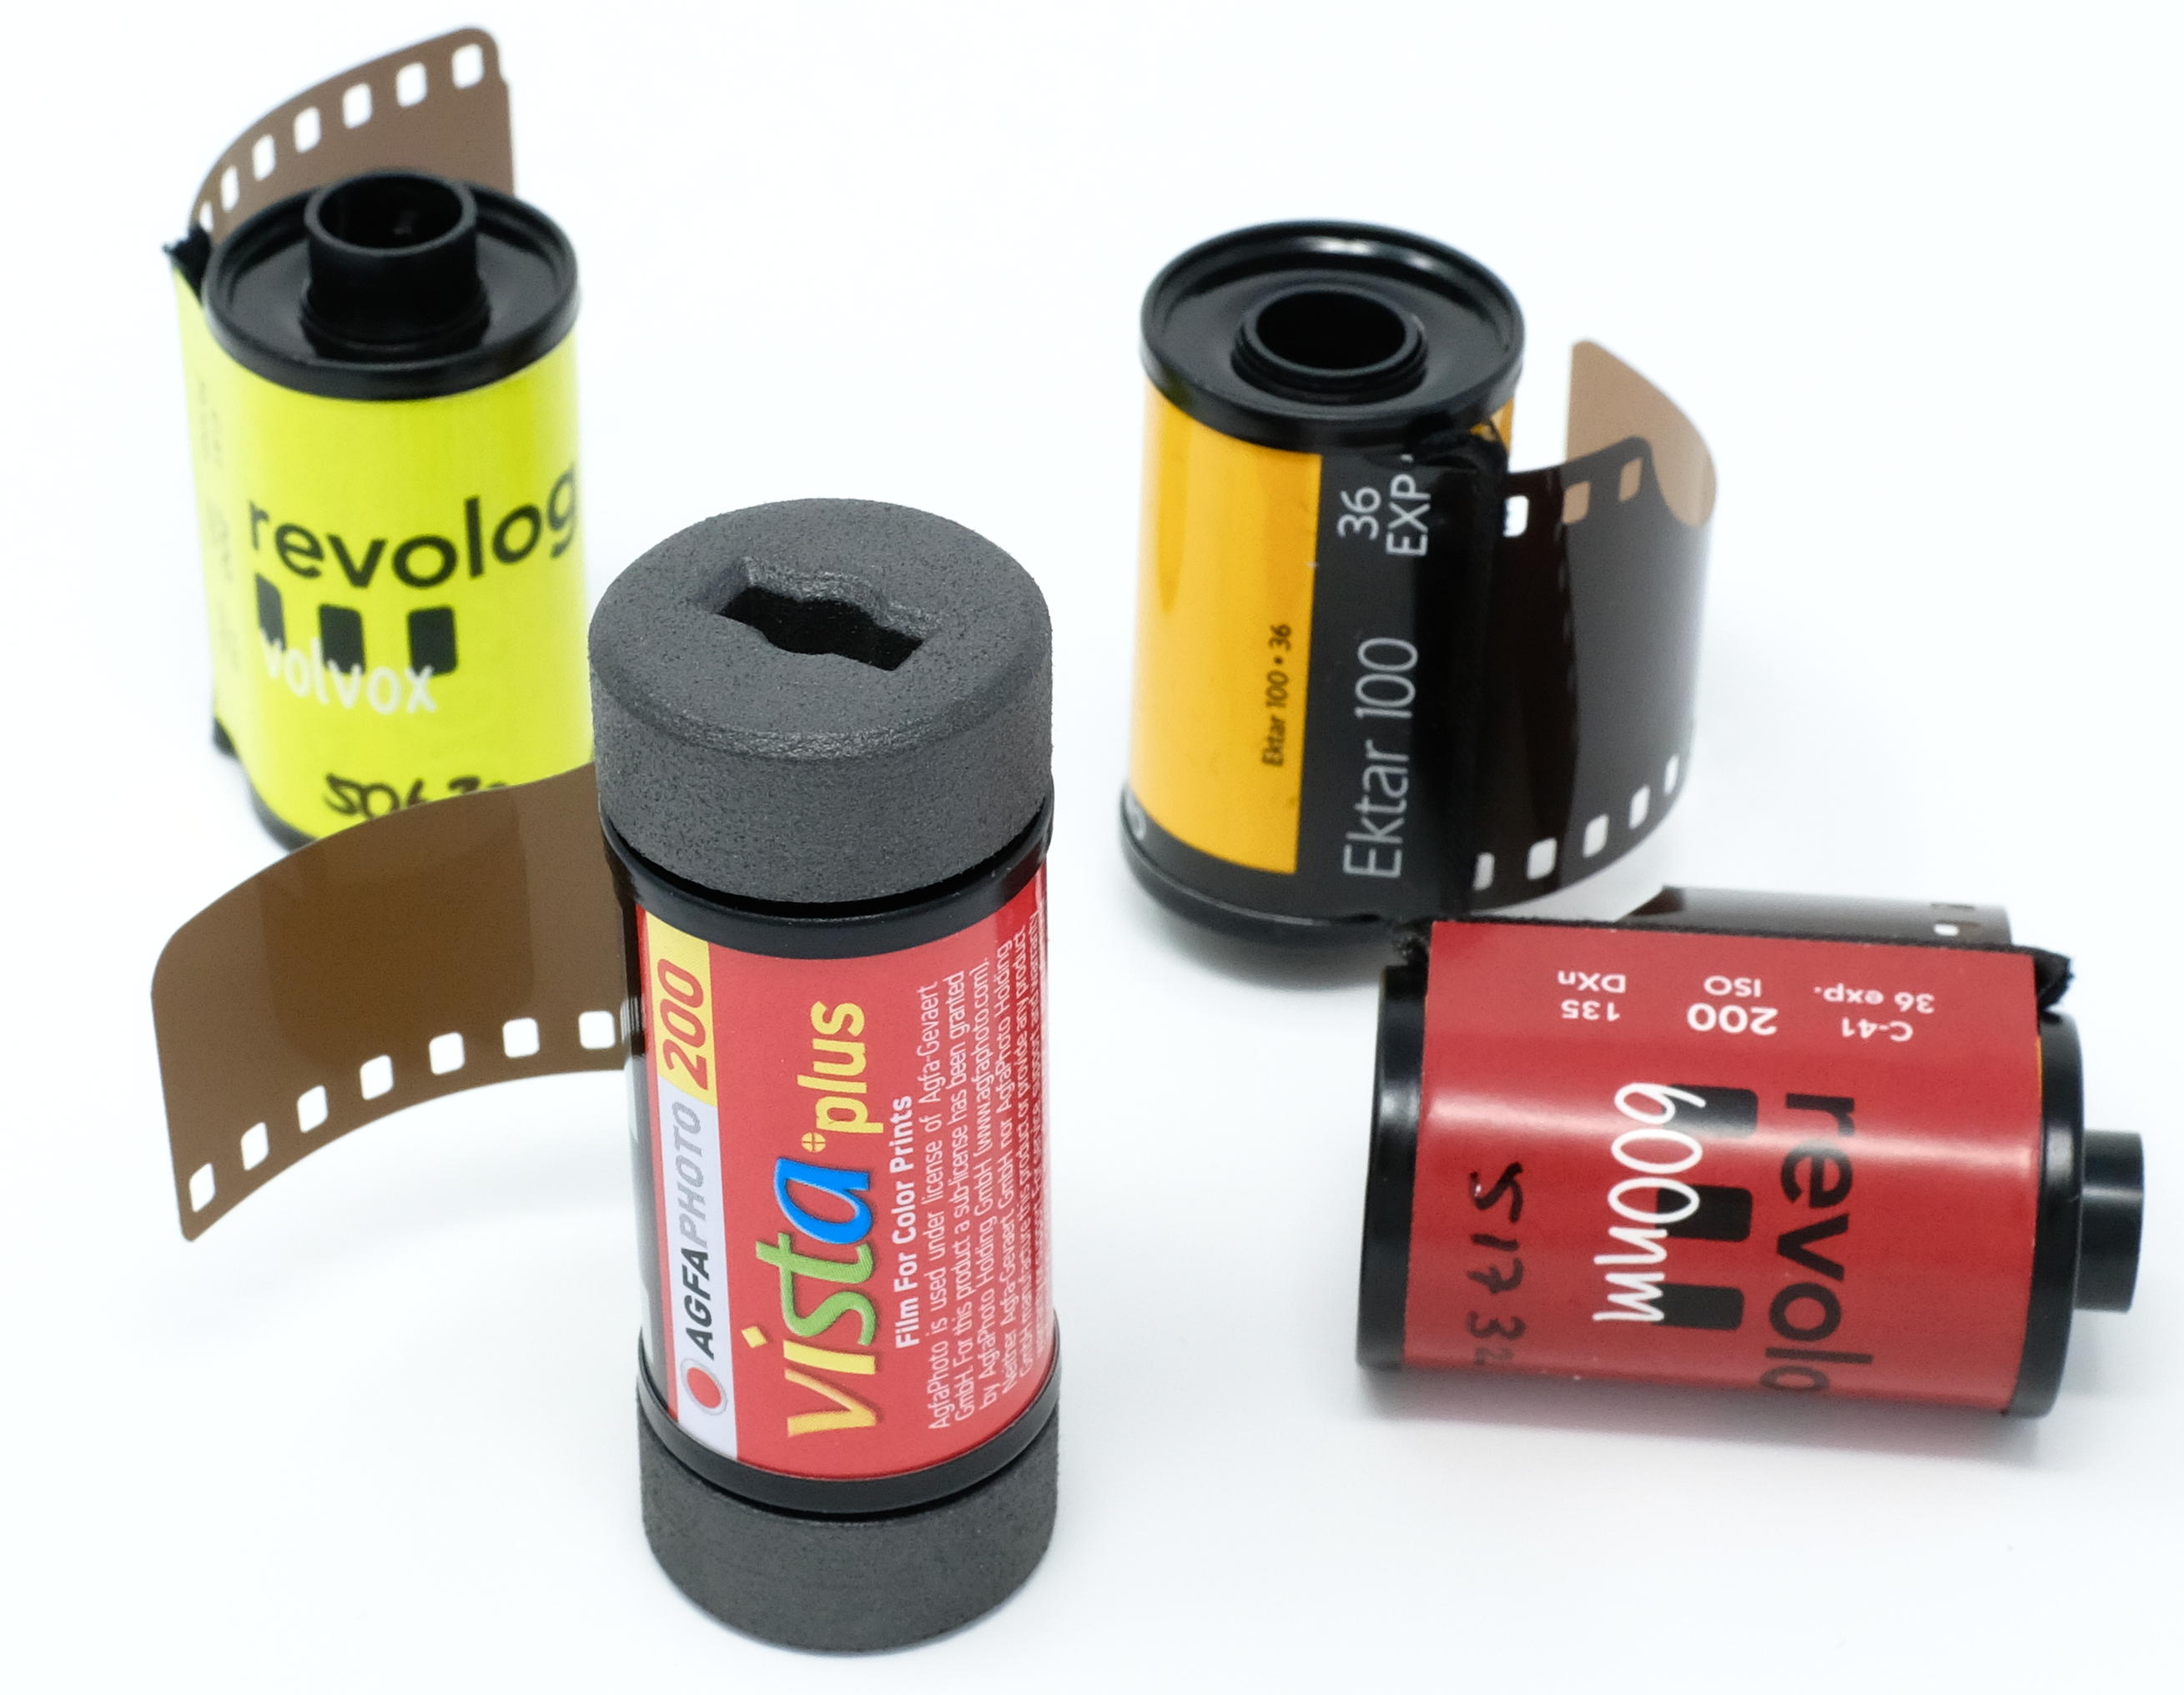 Buy 35mm Film Online, Over 125 films Available